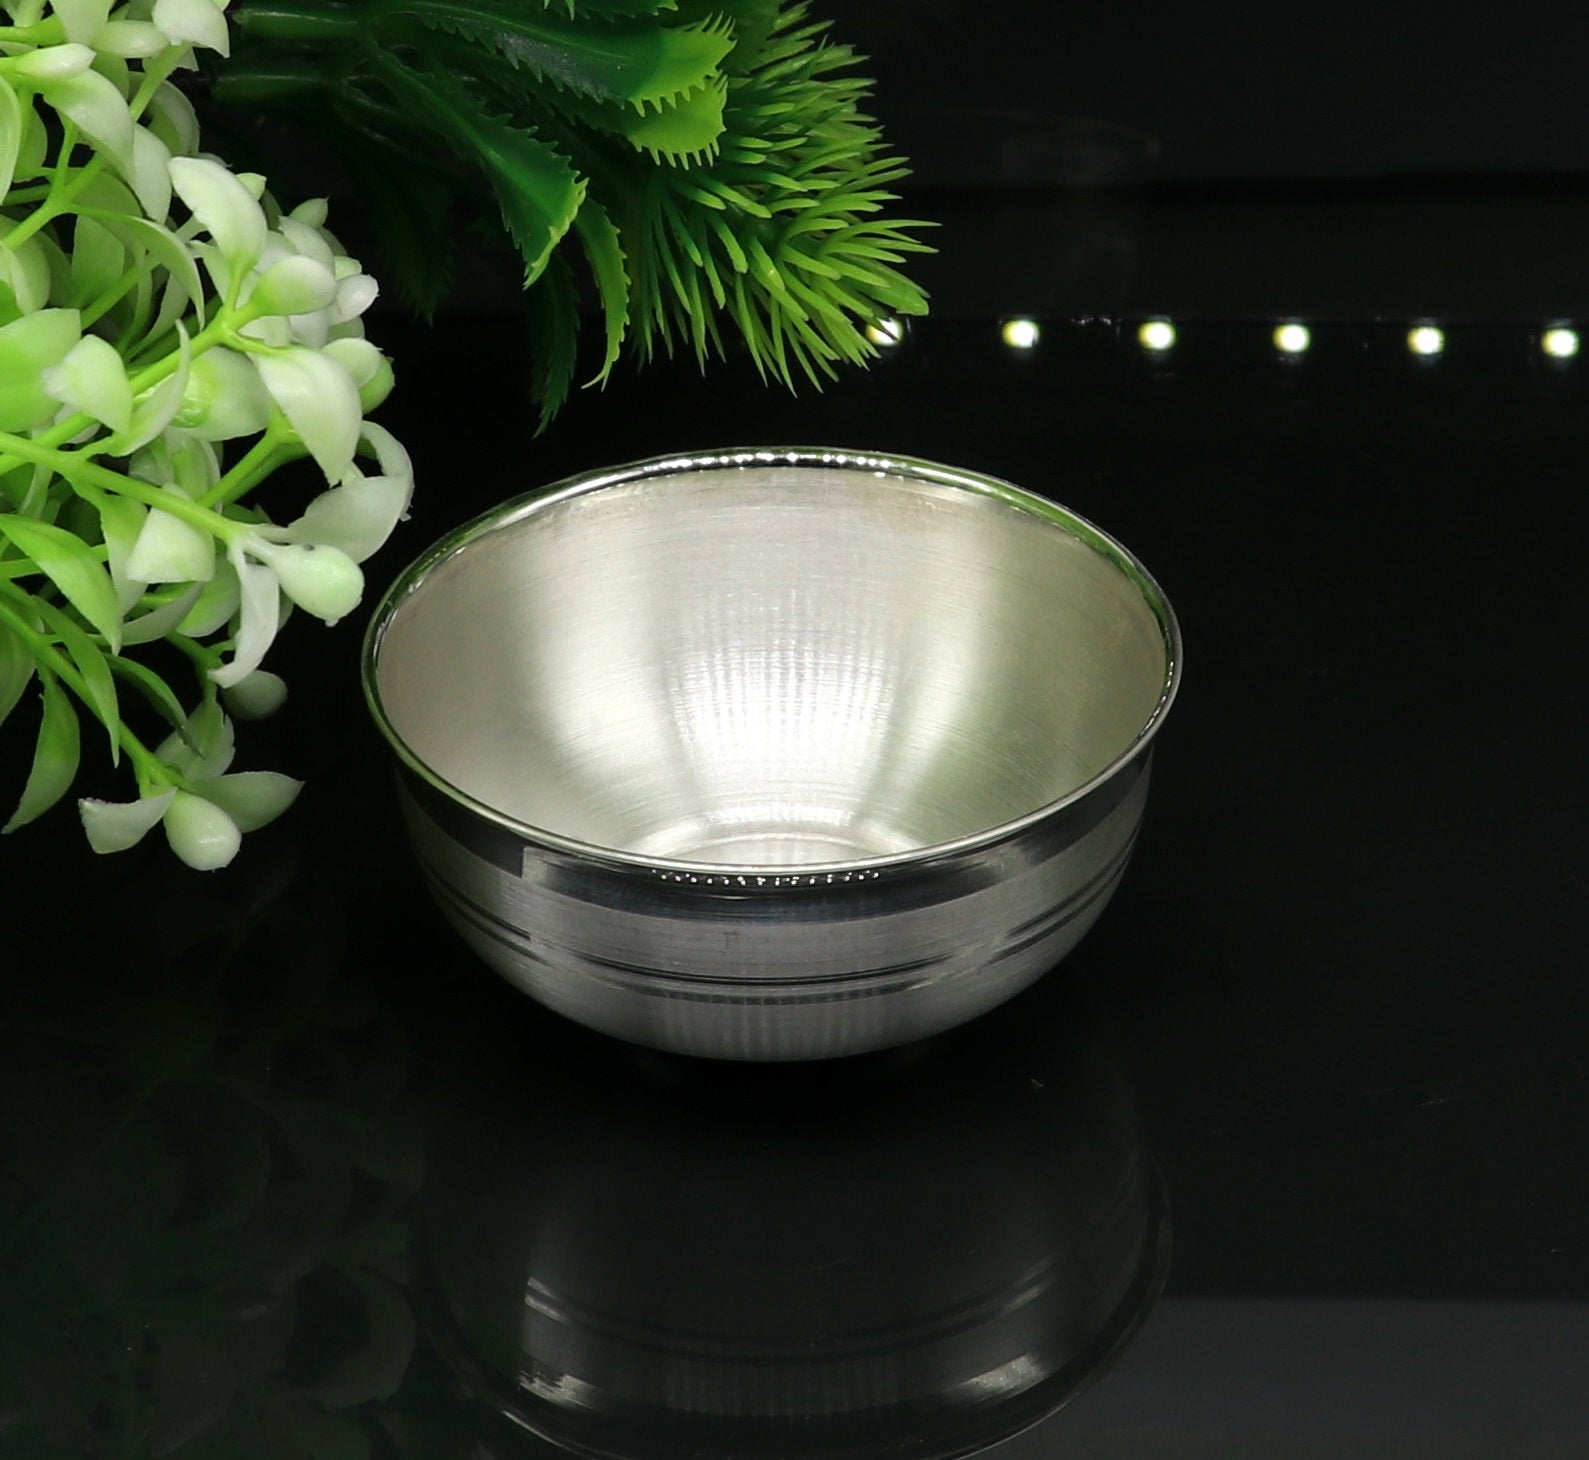 999 fine solid silver handmade bowl baby gift, pure silver vessel, silver utensils, silver puja article, puja utensils bowl India sv107 - TRIBAL ORNAMENTS